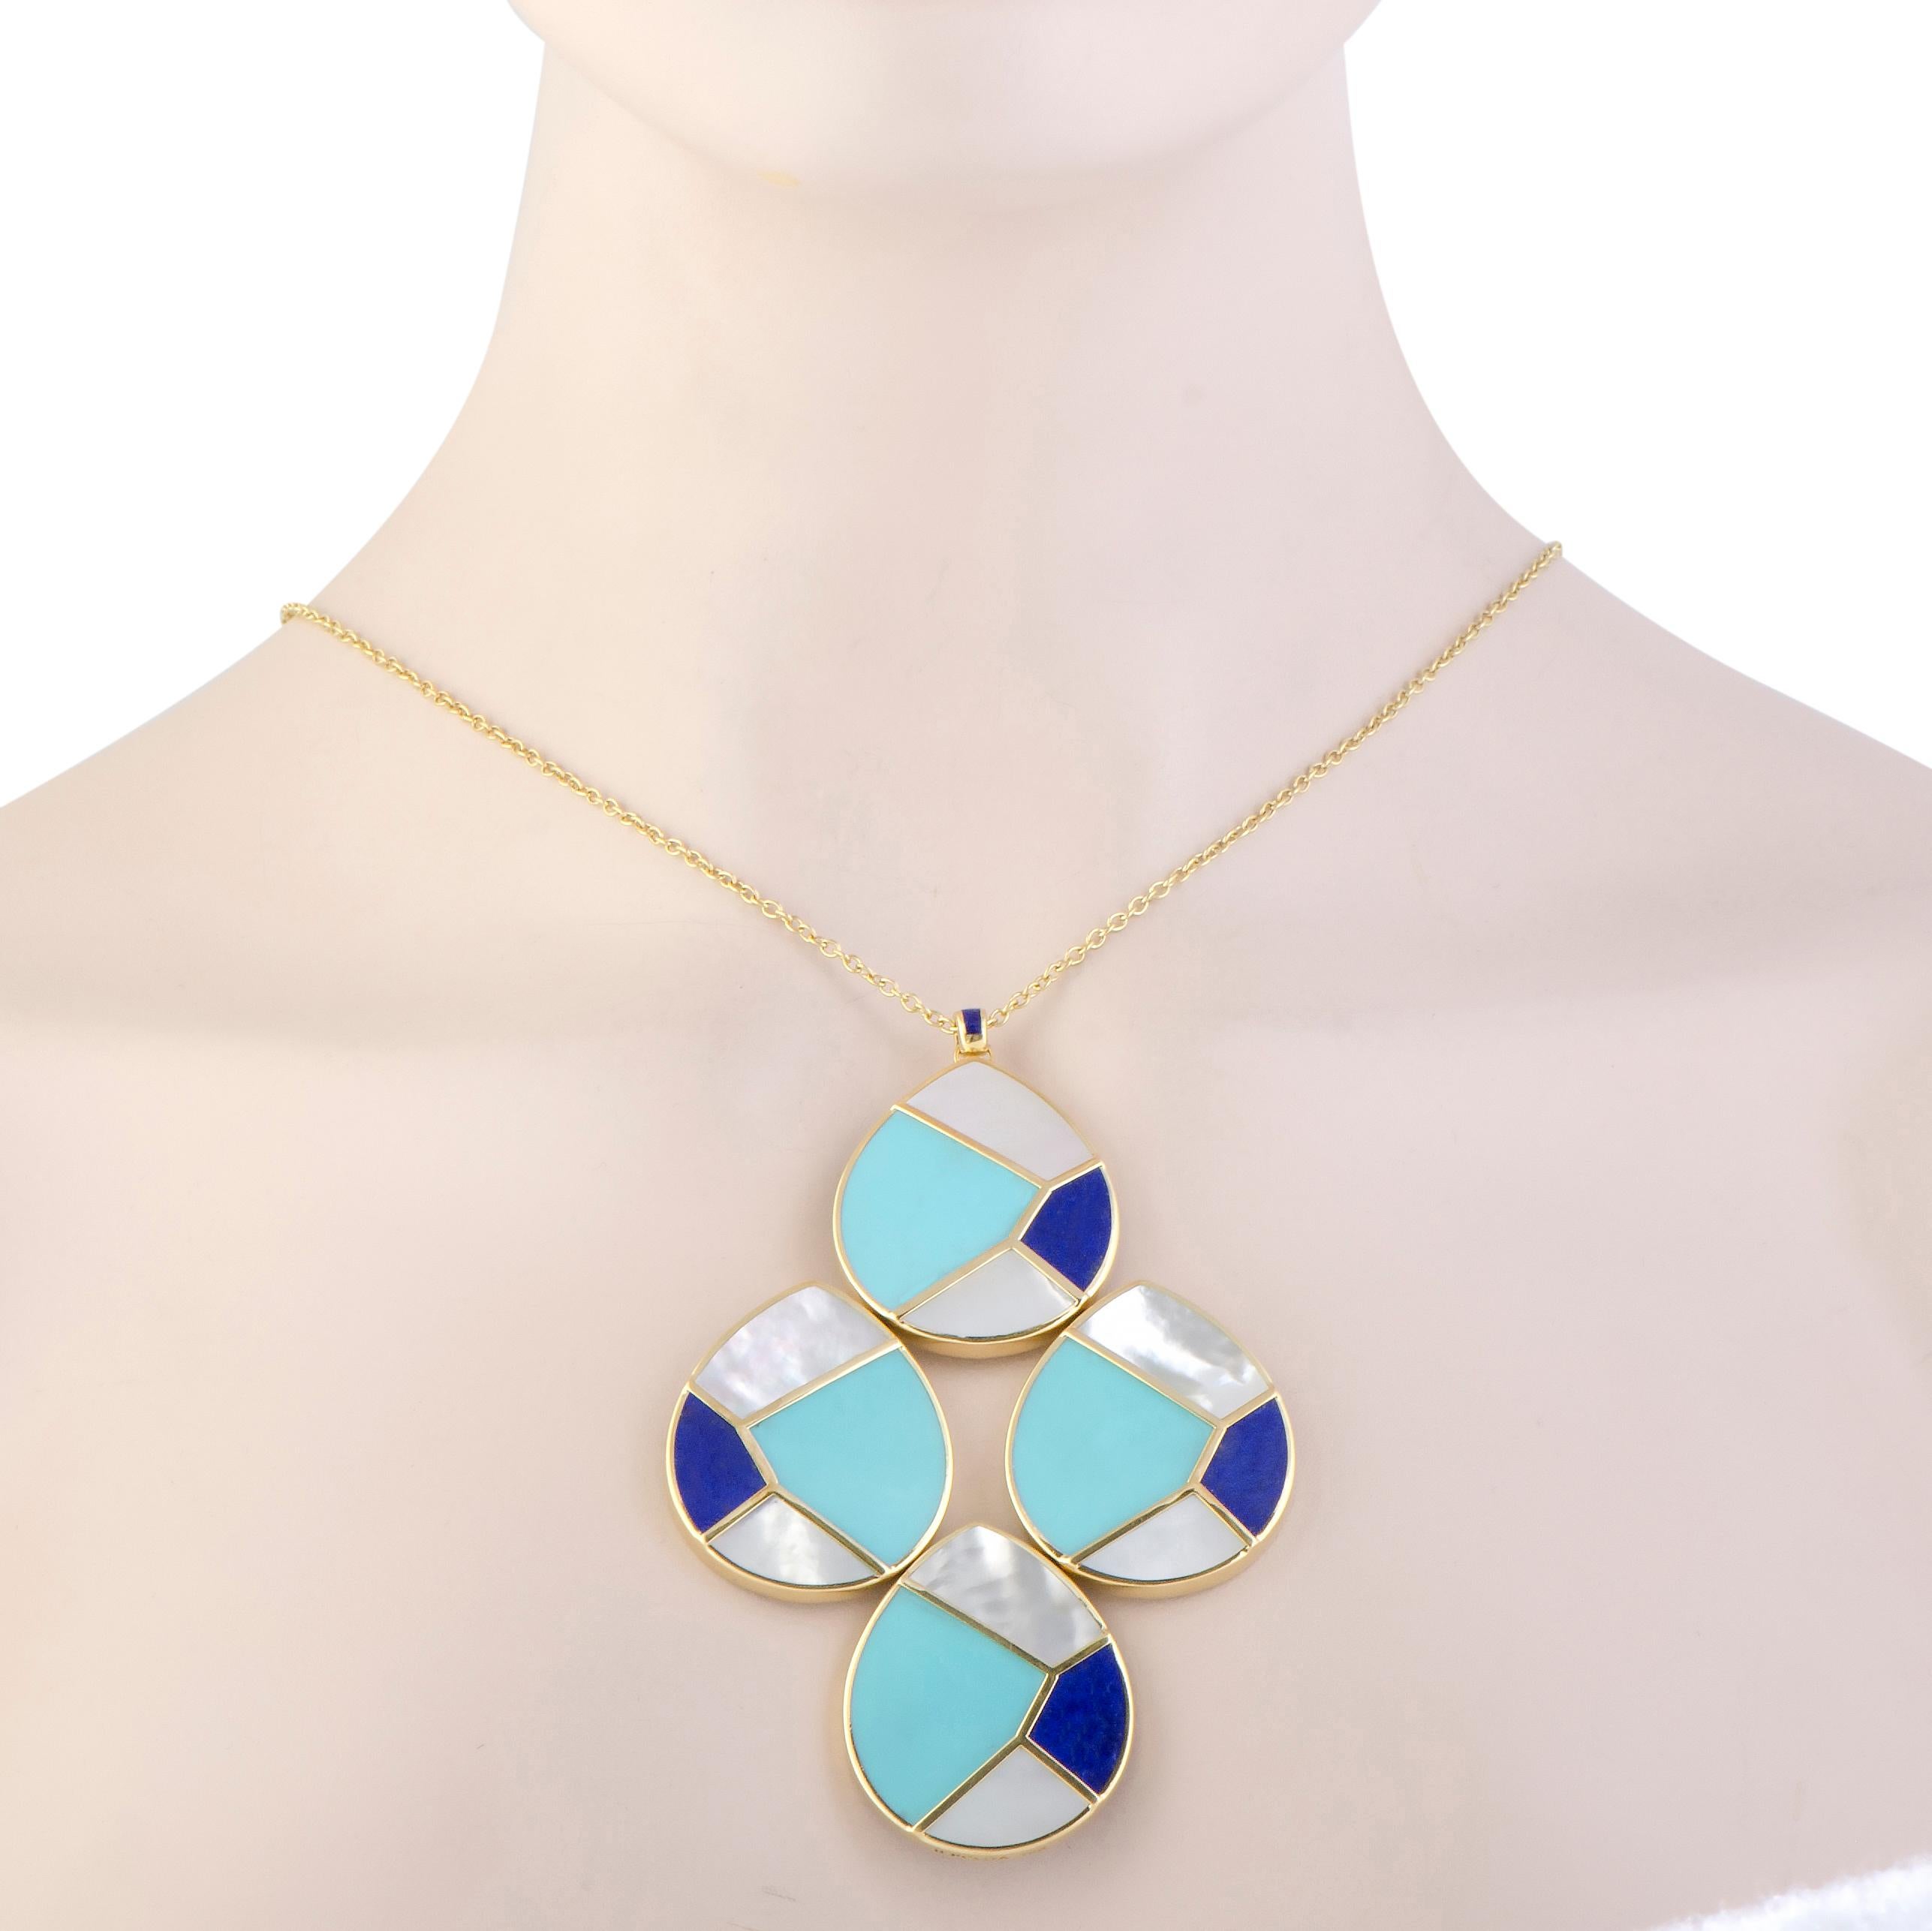 With a nifty pendant comprised of four teardrop-shaped segments, each featuring attractive décor reminiscent of a mosaic, this stunning Ippolita necklace offers alluring elegant appearance. It is made of gleaming 18K yellow gold and presented within